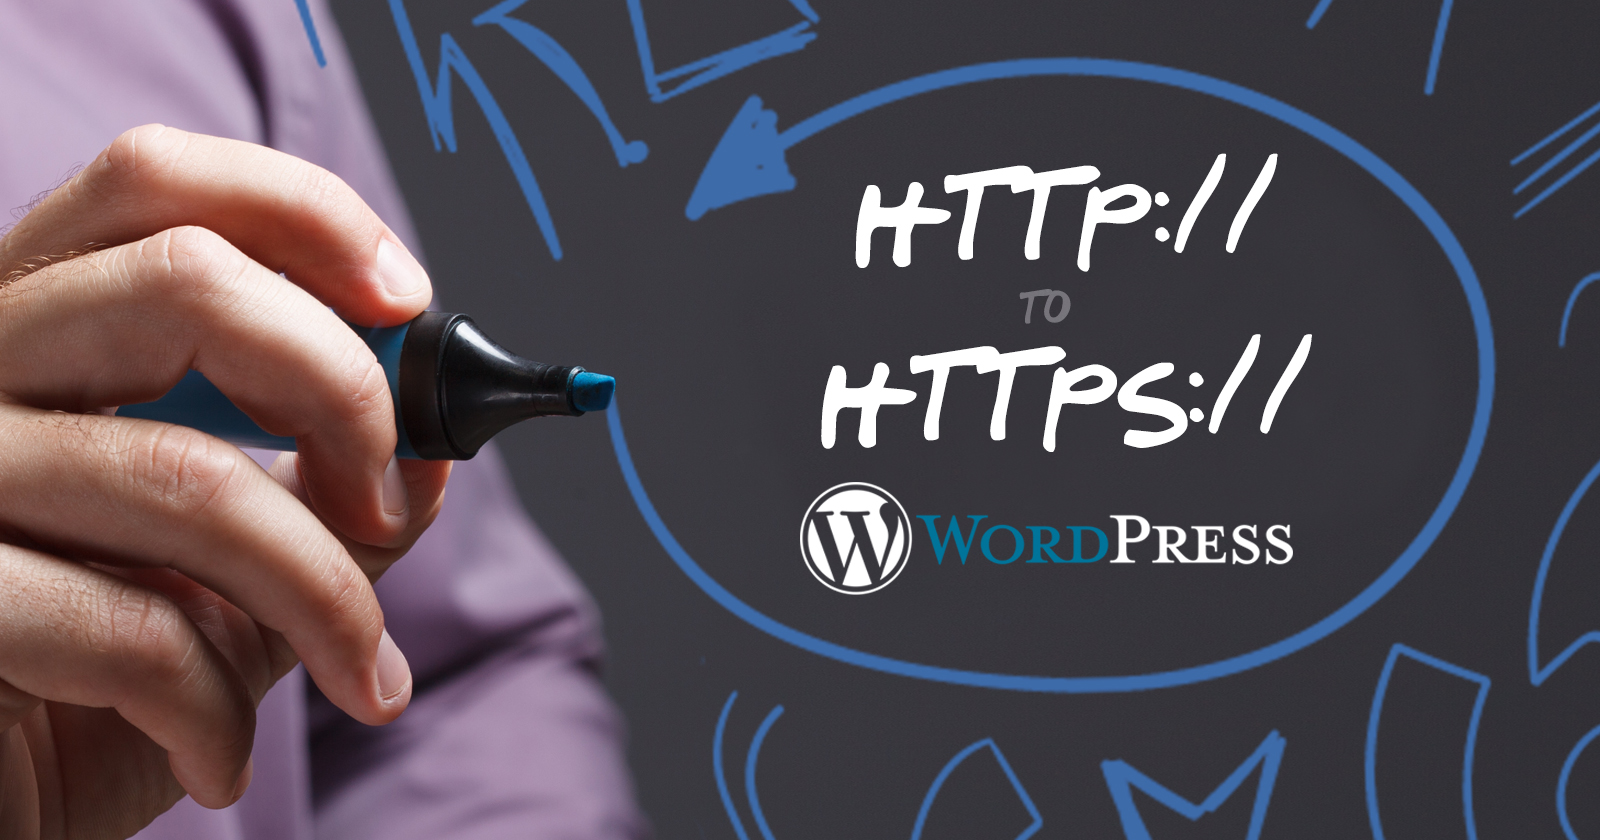 wordpress migrate from http to https